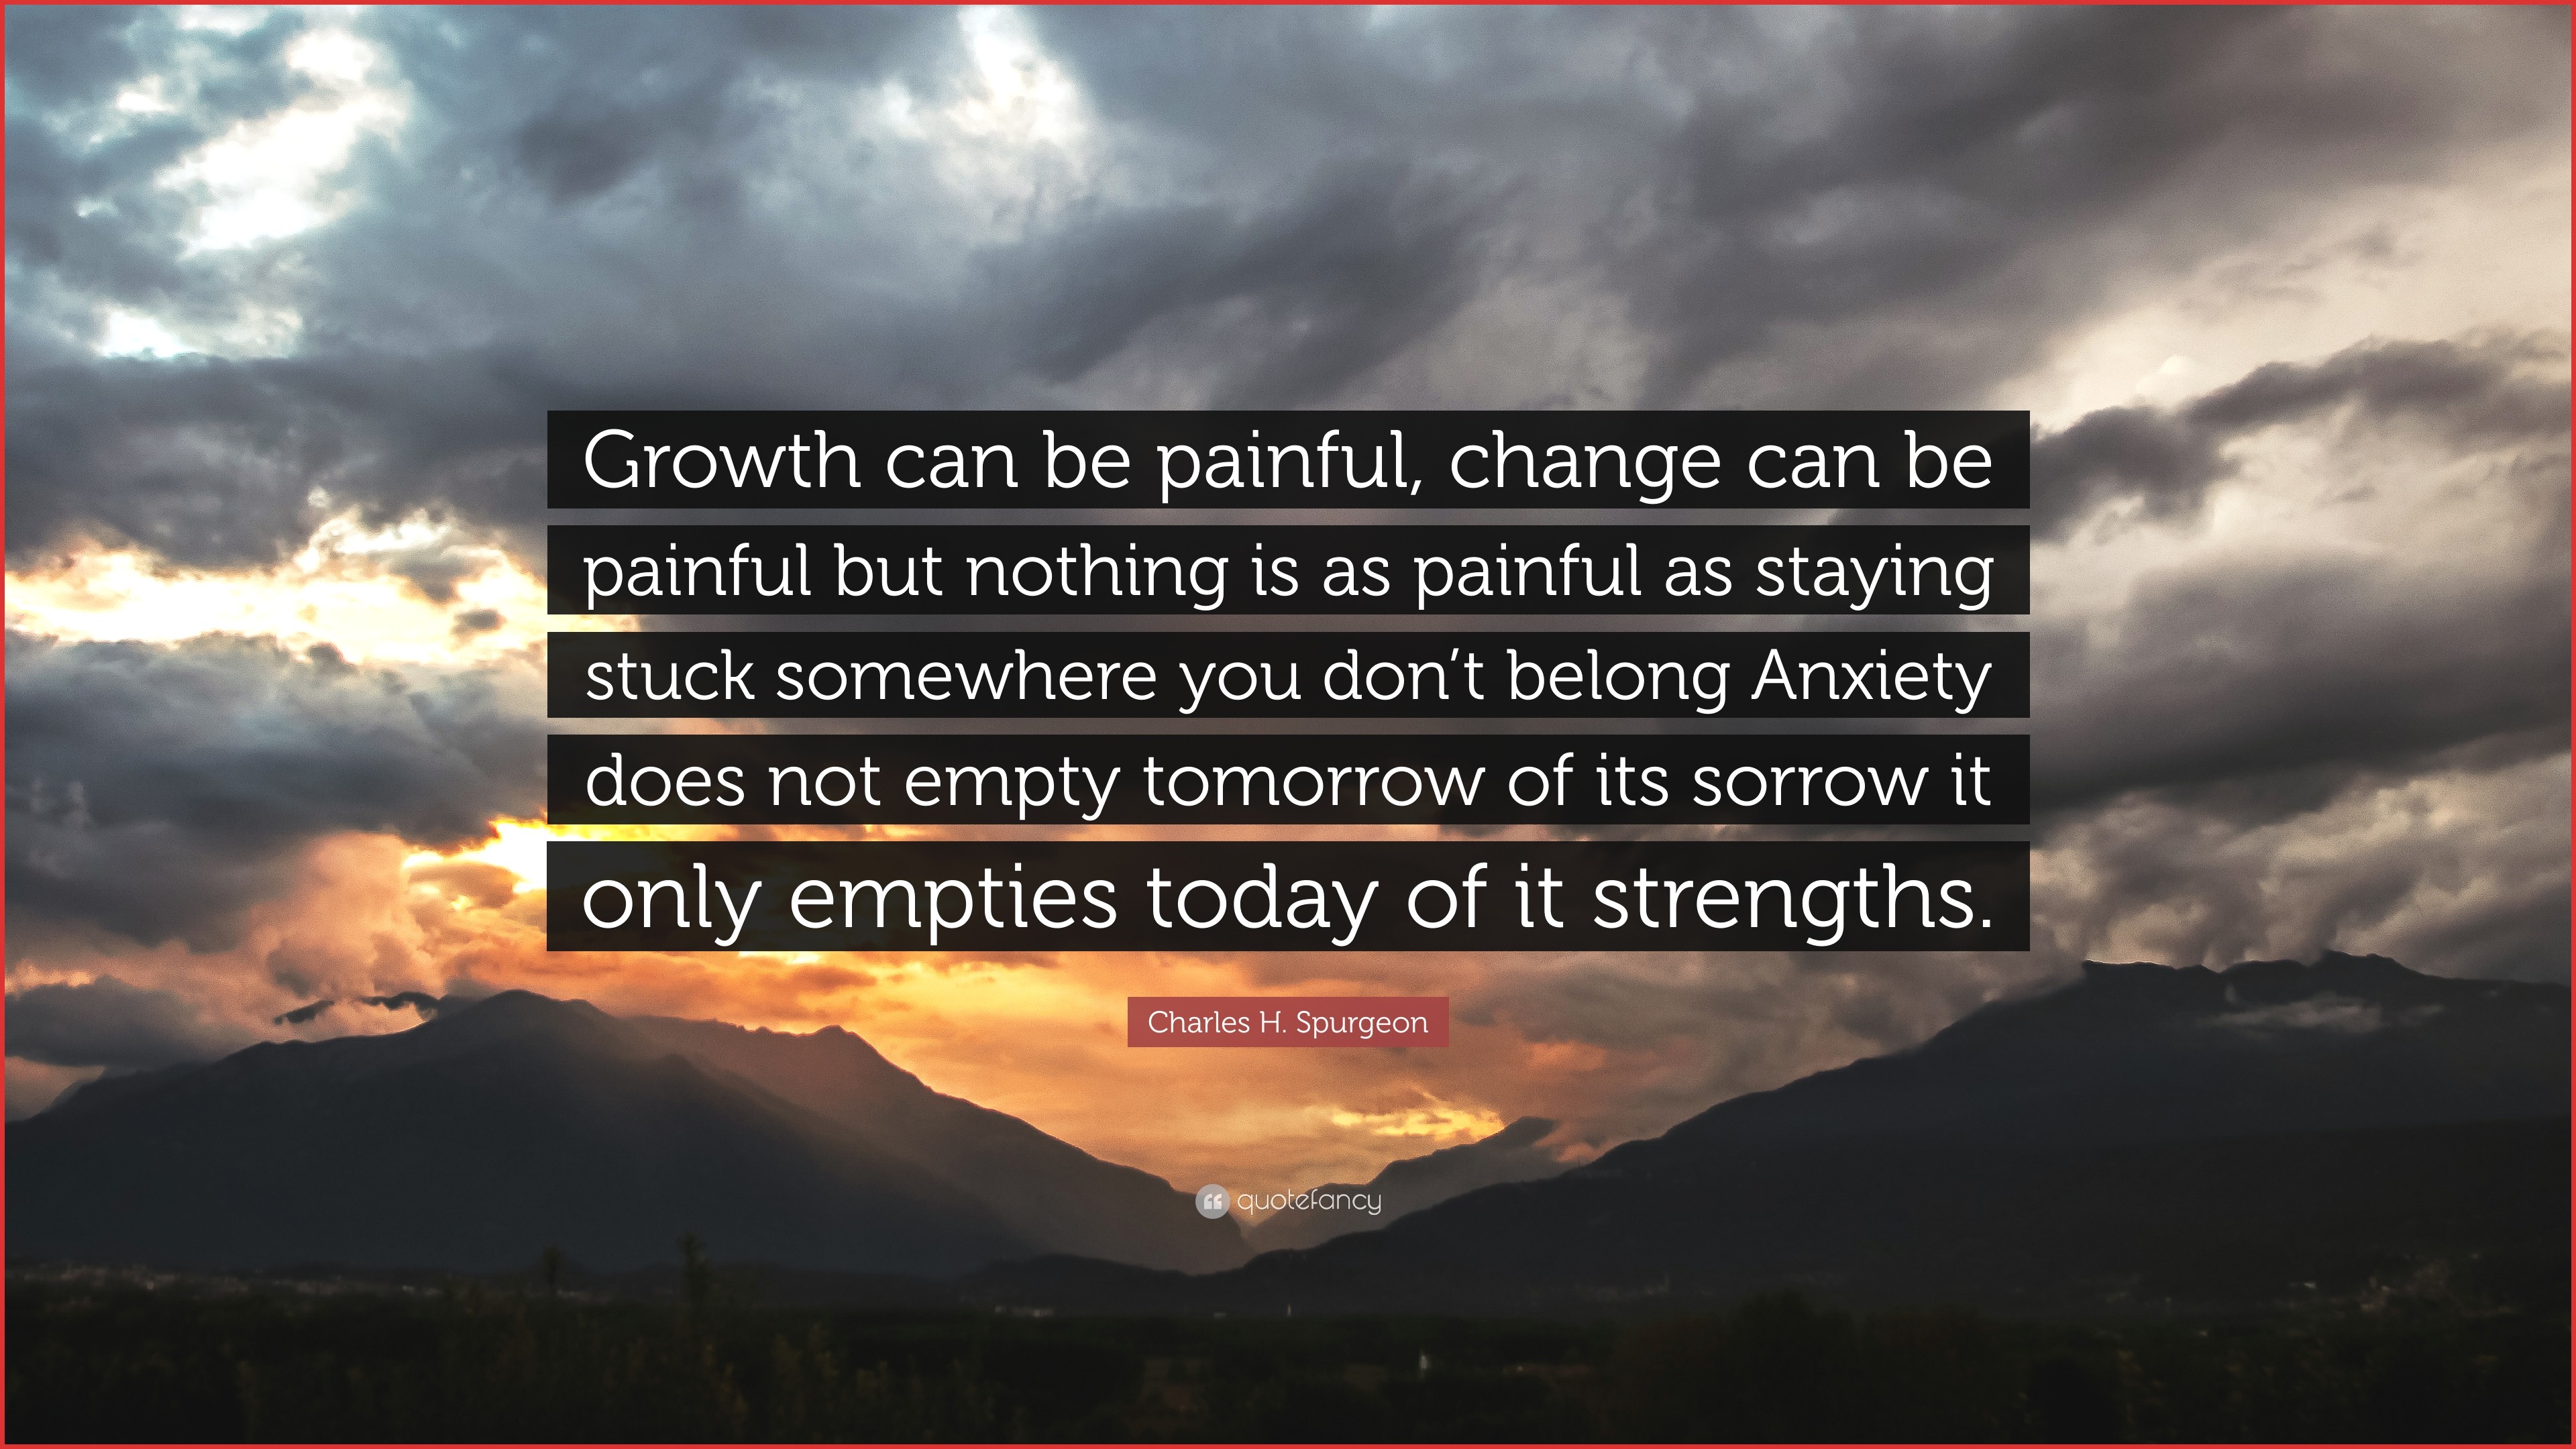 growth can be painful, change can be painful but nothing is as painful as staying stuck somewhere you don't belong anxiety does not empty tomorrow of its sorrow it only empties today of its strengths.